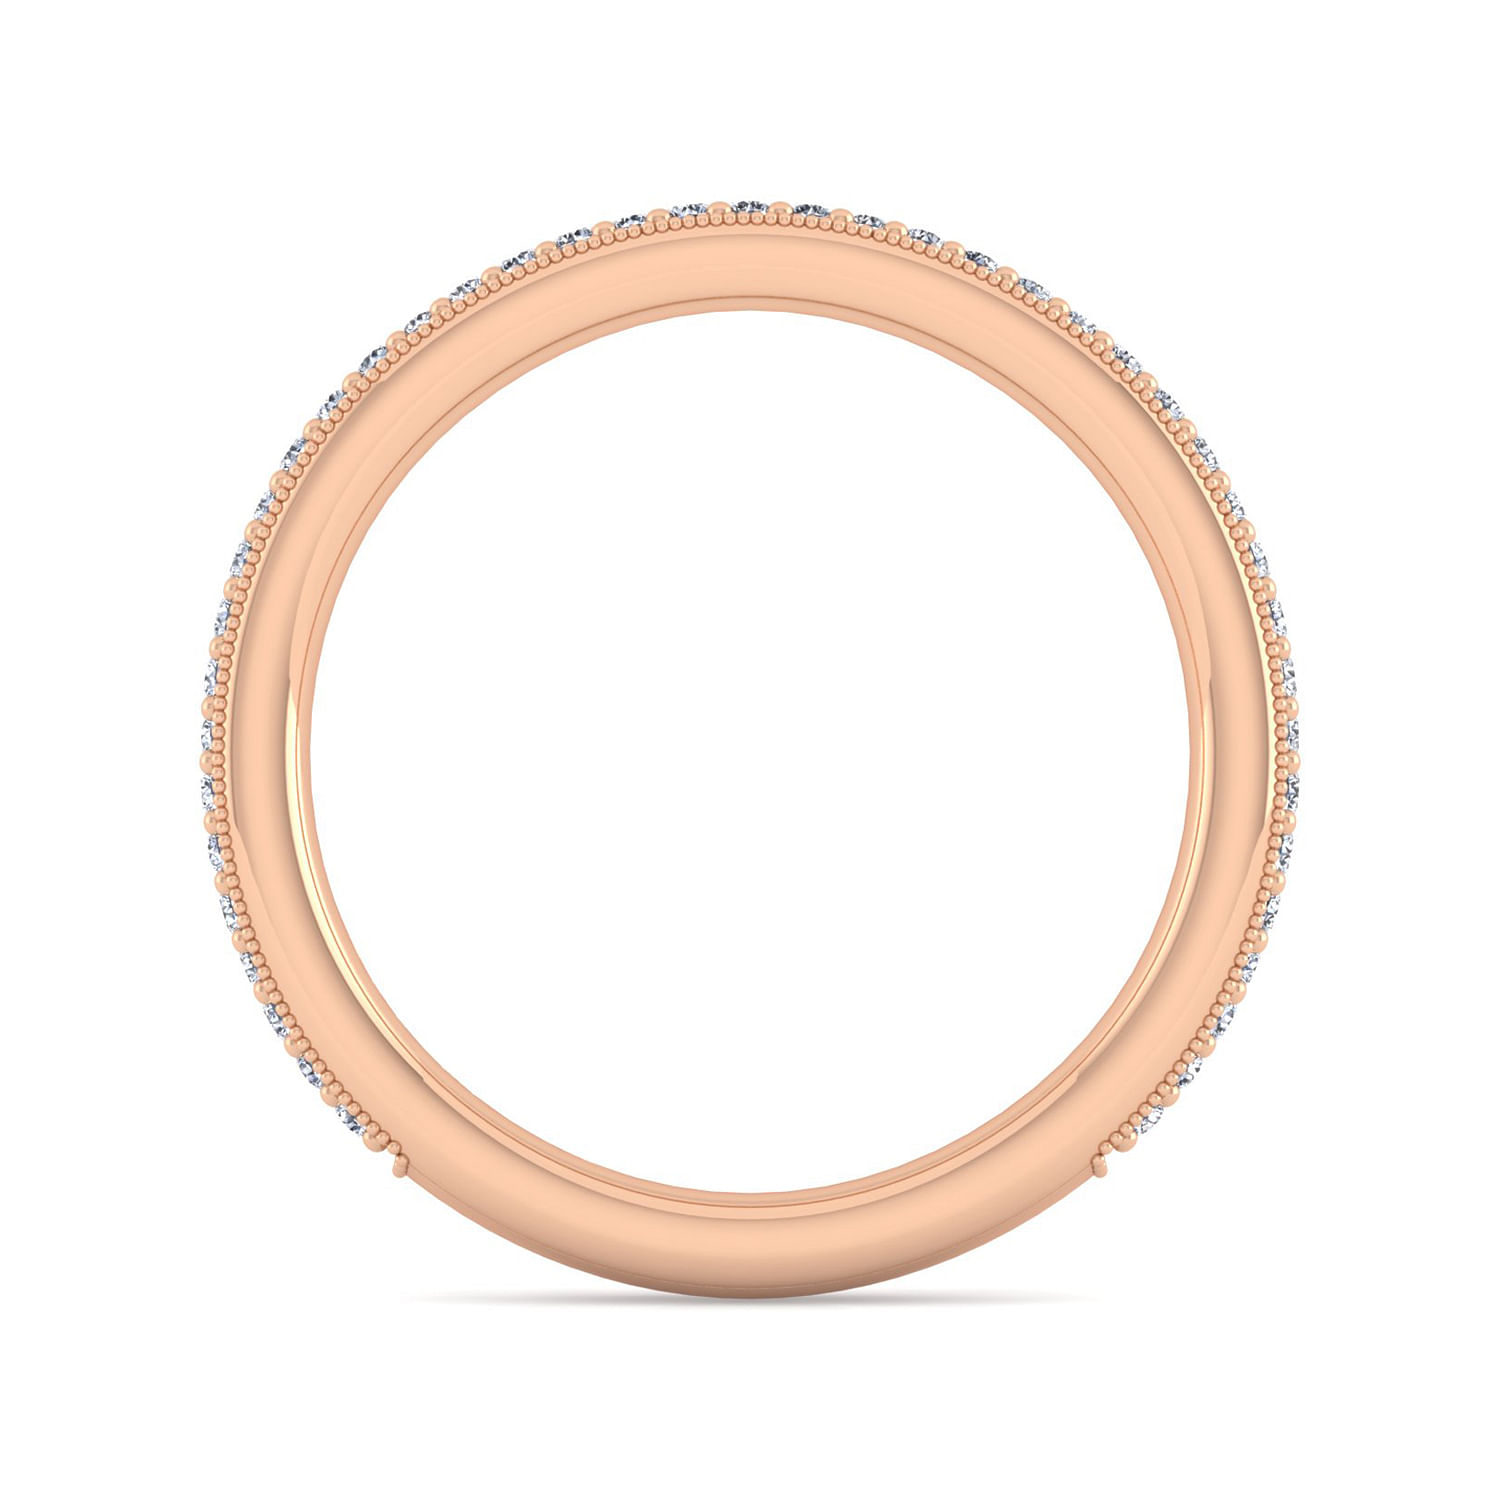 14K Rose Gold Channel Prong Diamond Anniversary Band with Milgrain